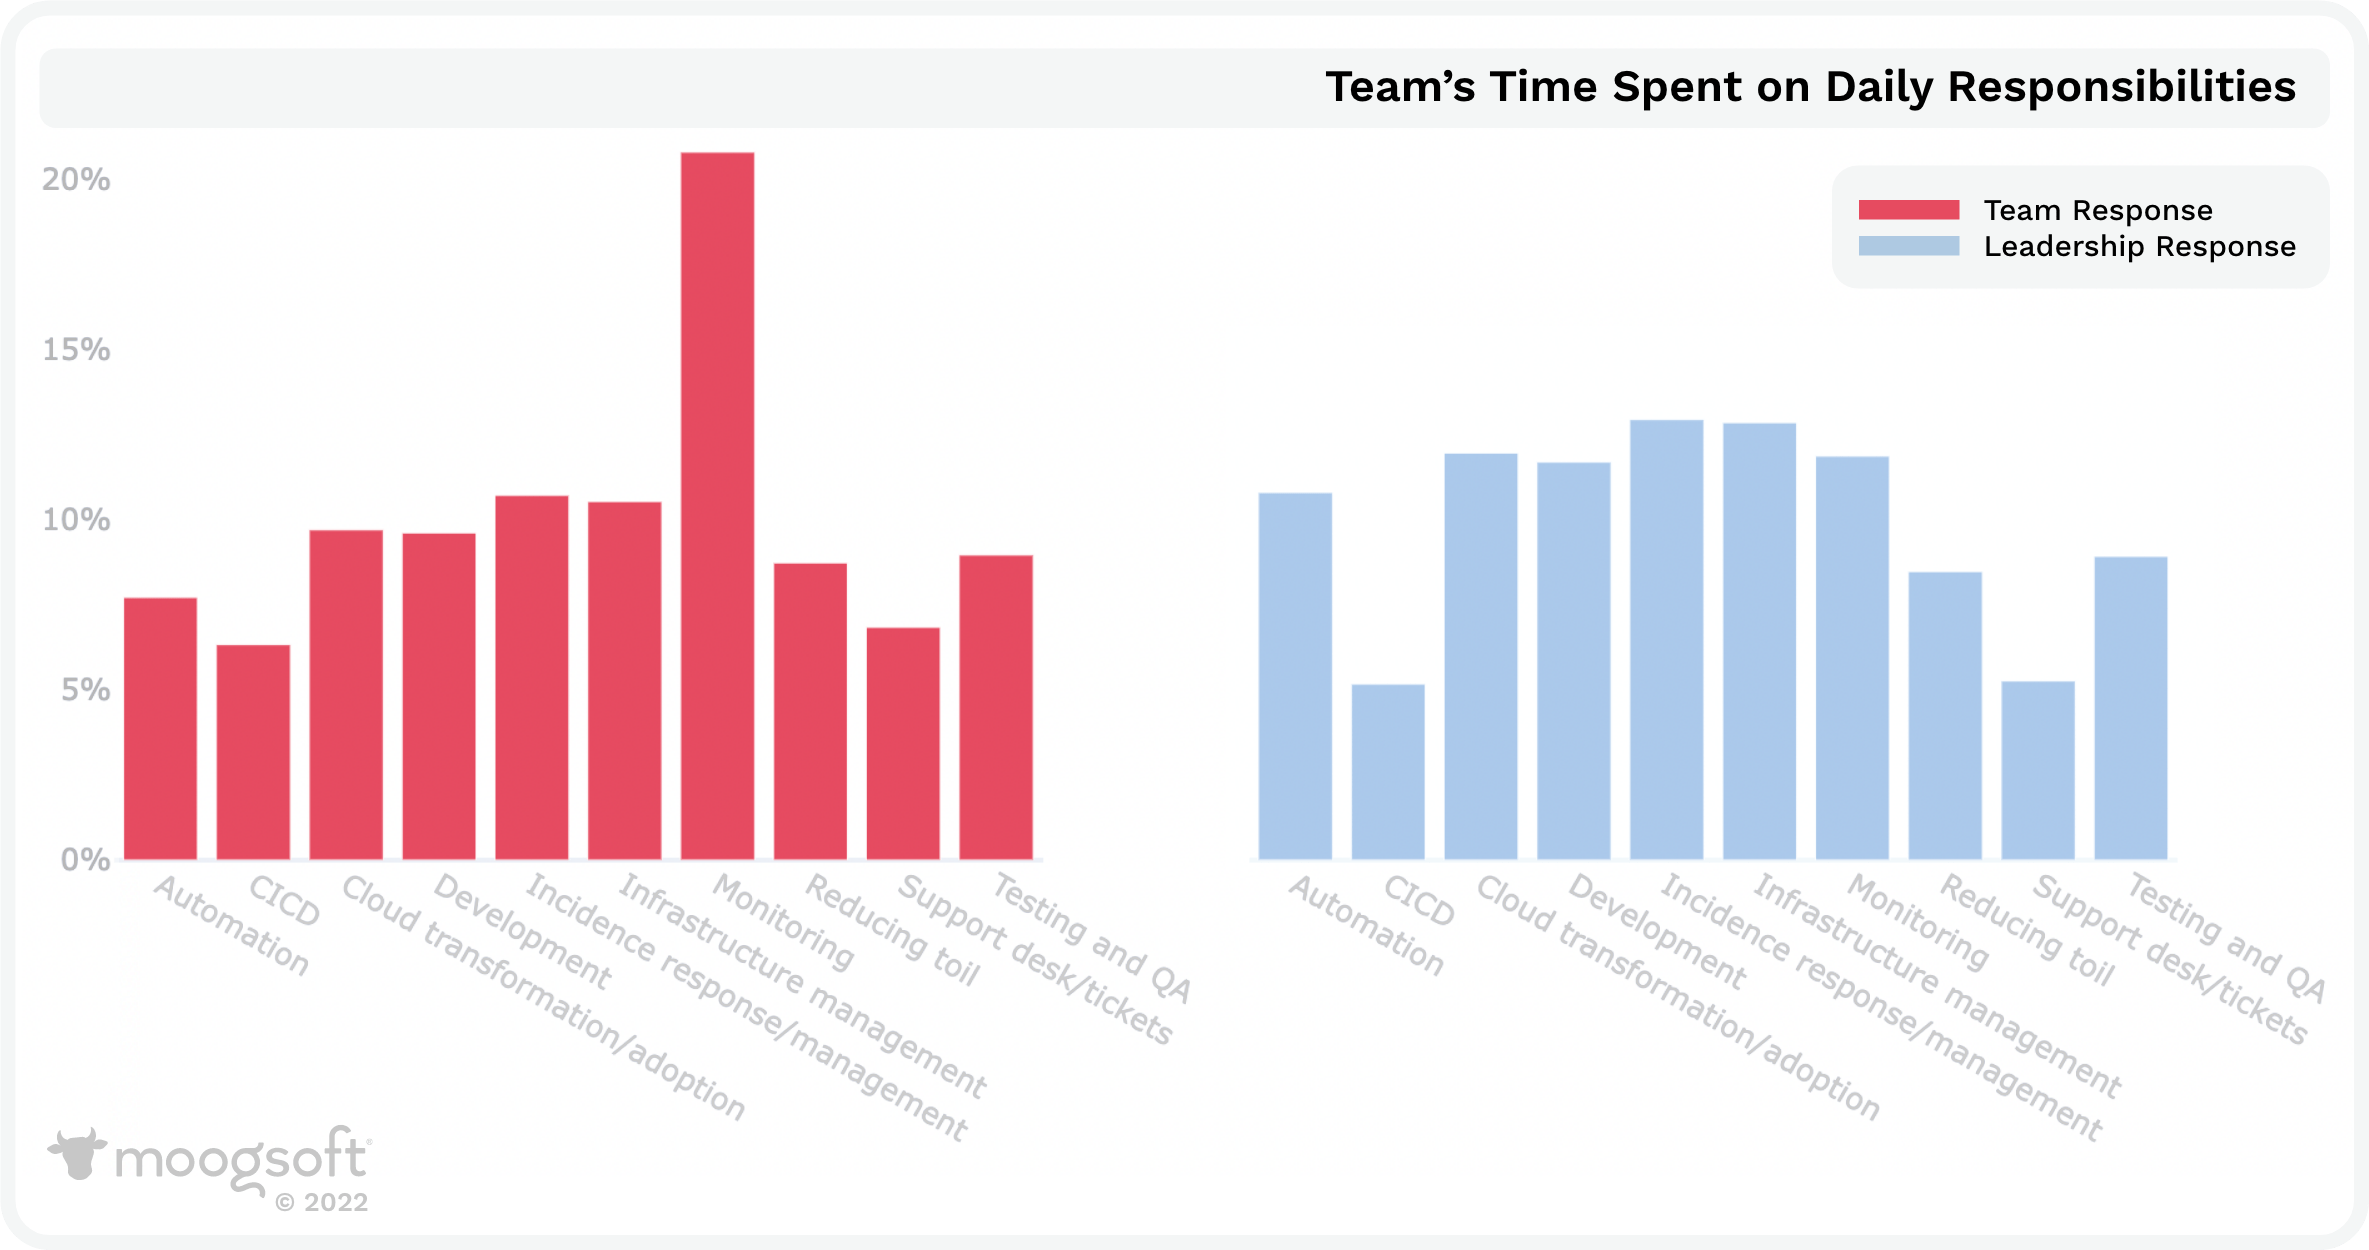 Team's time spent on daily responsibilities chart